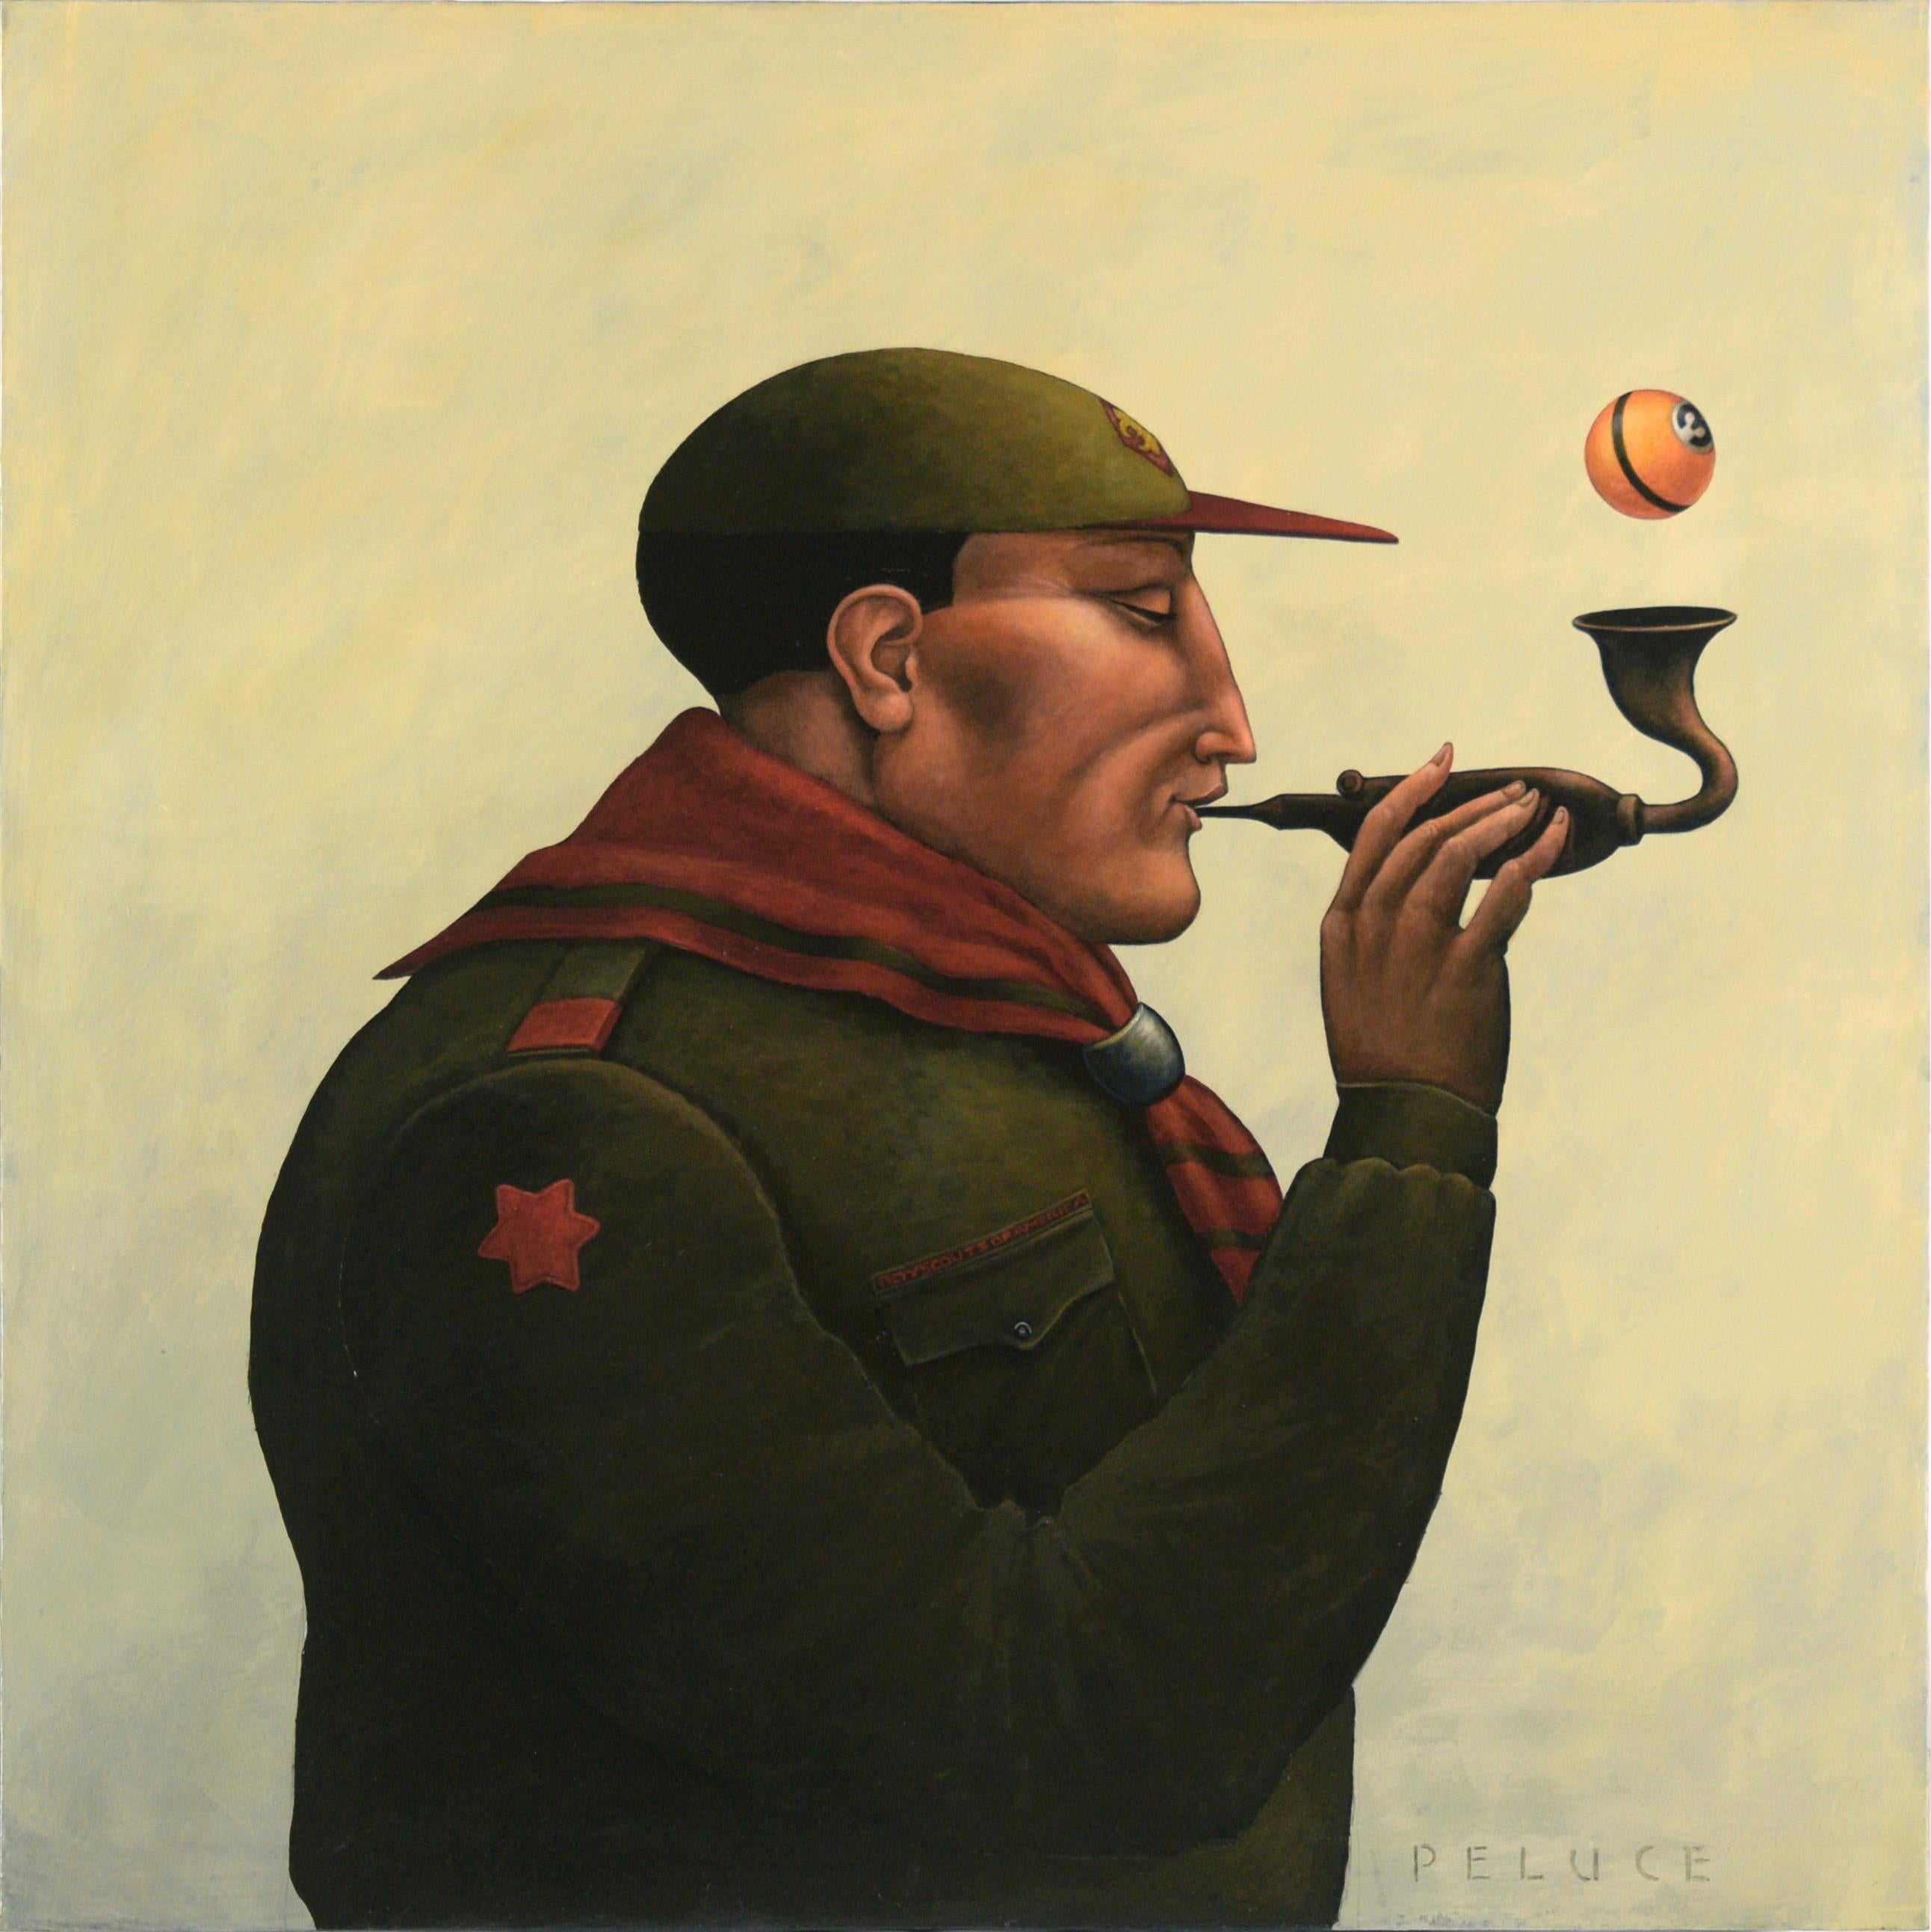 Robert Peluce Portrait Painting - Boy Scout with a Pipe and Billiard Ball: Surrealist Portrait in Oil on Polyester